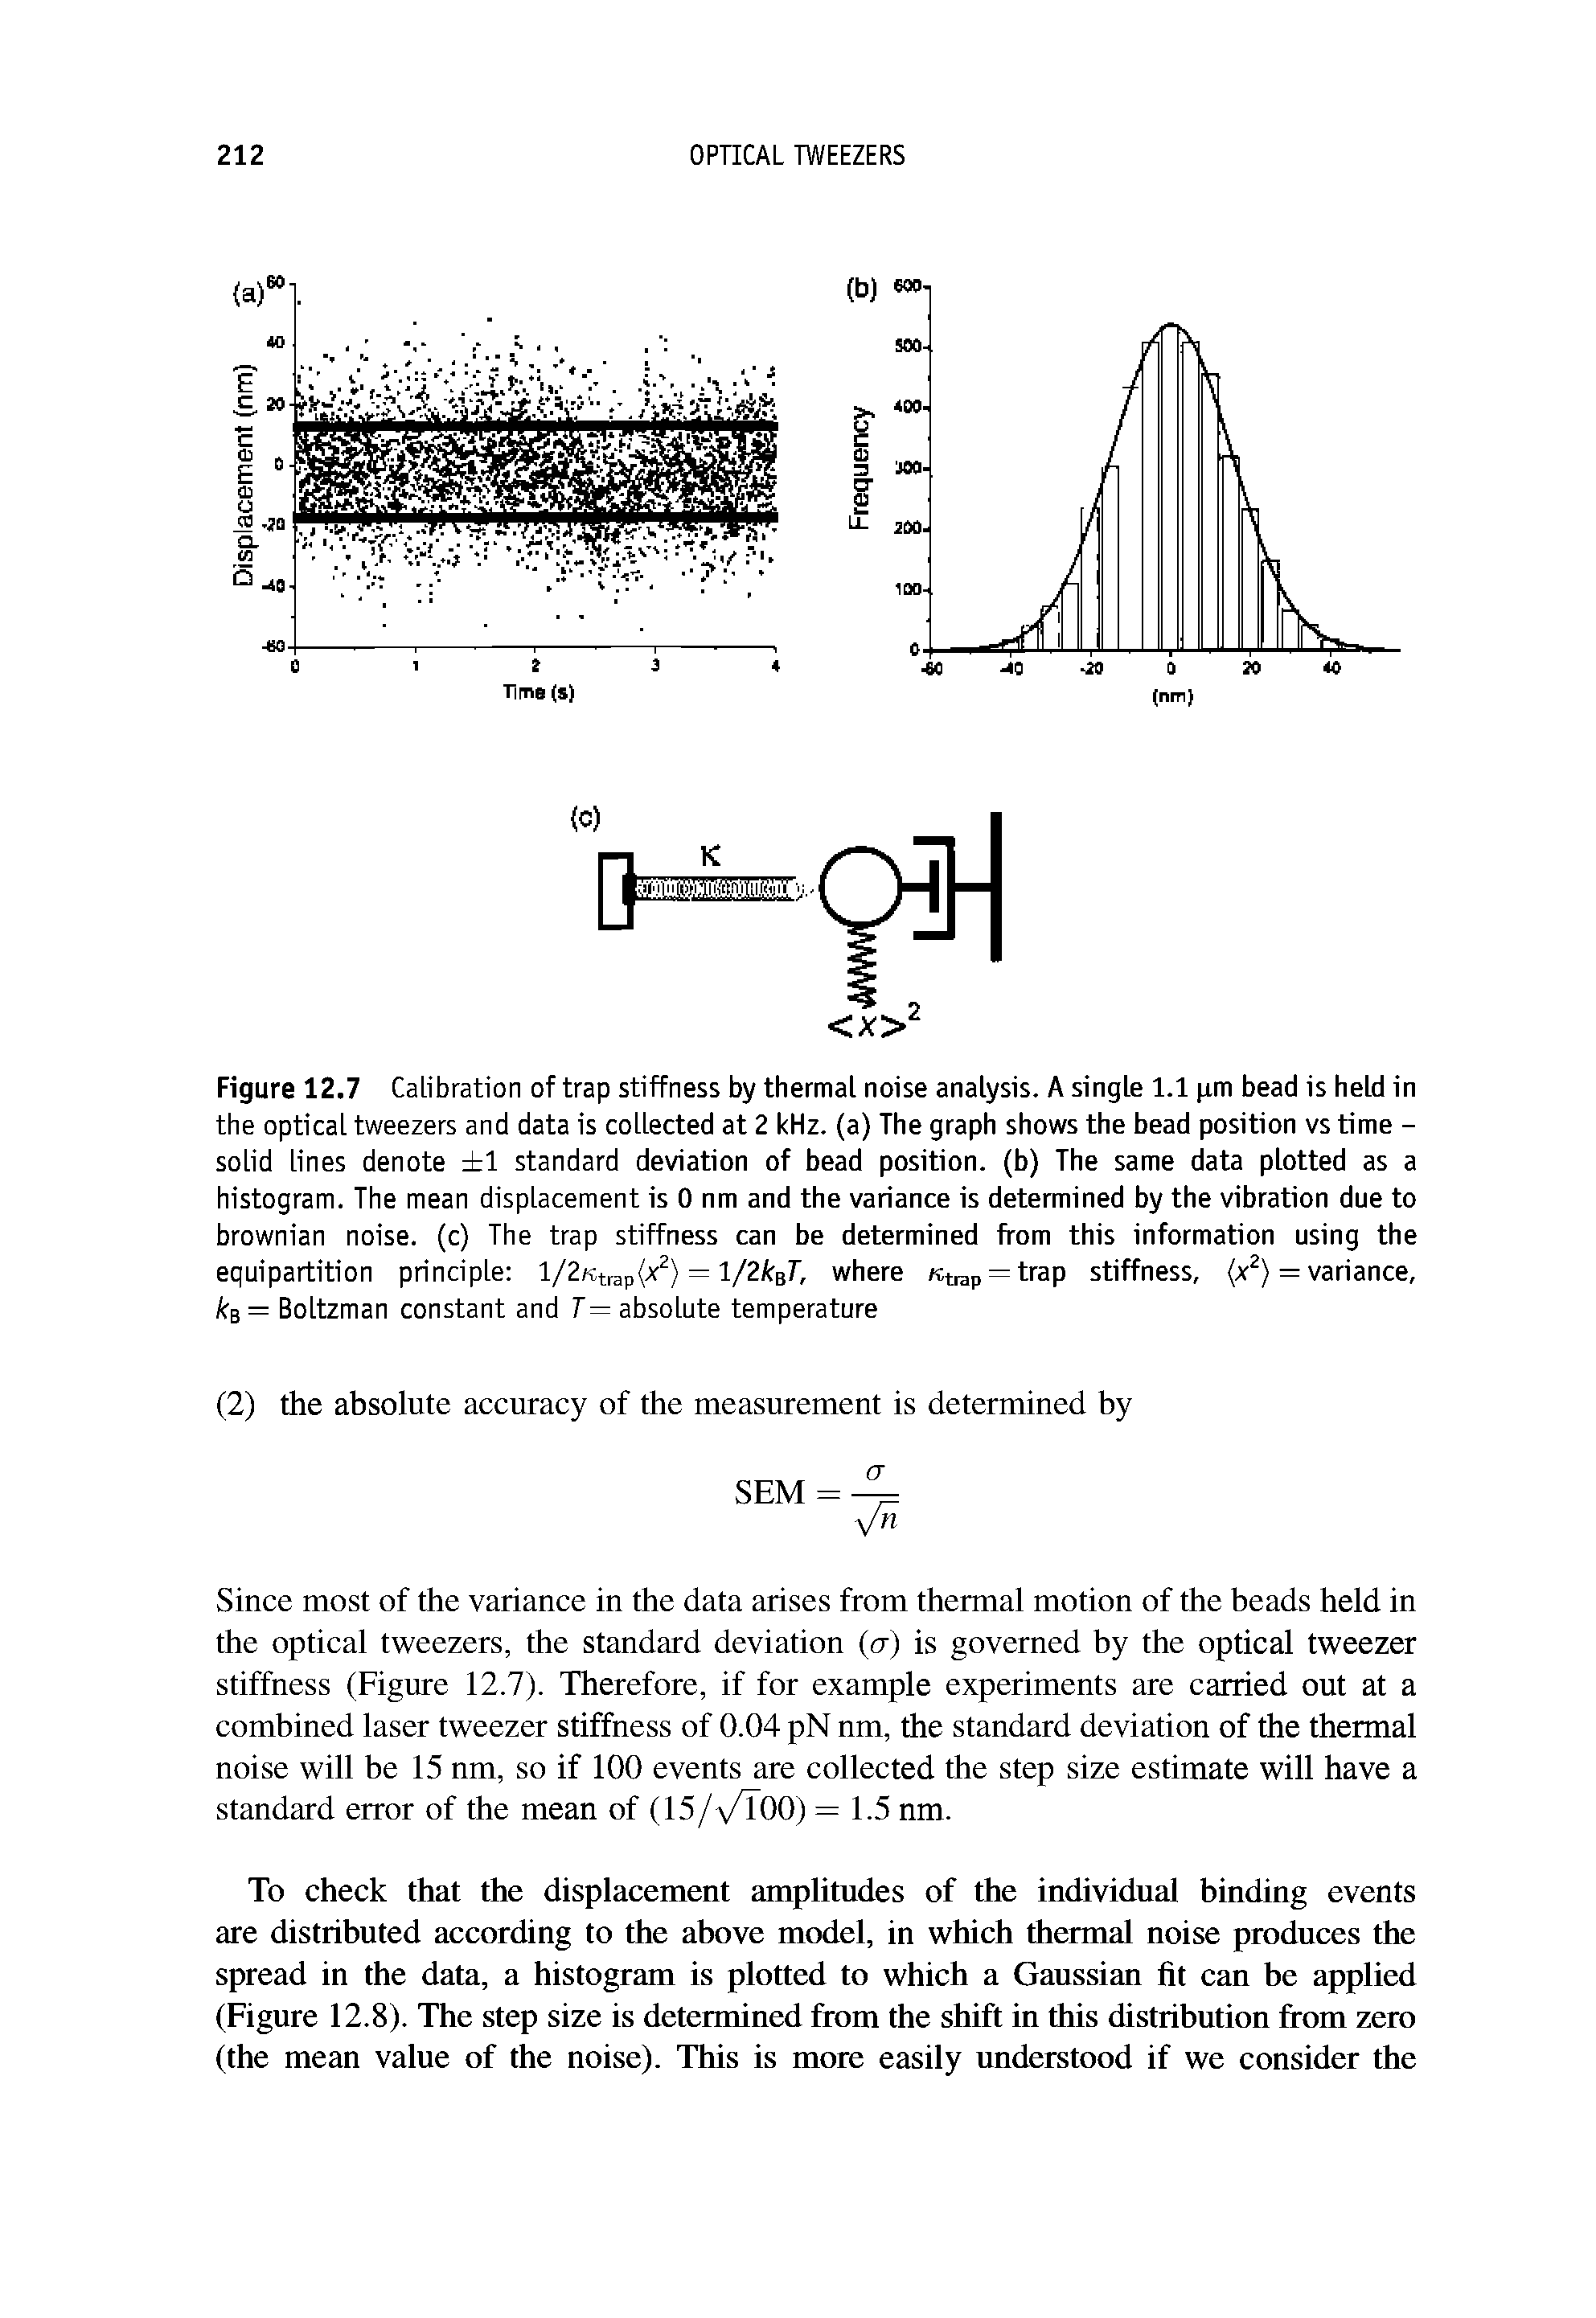 Figure 12.7 CaLibration of trap stiffness by thermal noise analysis. A single 1.1 jim bead is held in the optical tweezers and data is collected at 2 kHz. (a) The graph shows the bead position vs time -solid lines denote 1 standard deviation of bead position, (b) The same data plotted as a histogram. The mean displacement is 0 nm and the variance is determined by the vibration due to brownian noise, (c) The trap stiffness can be determined from this information using the equipartition principle lf2Ktrsj, x ) = l/2ksT, where Ktrap trap stiffness, (x ) = variance, /fB= Boltzman constant and T= absolute temperature...